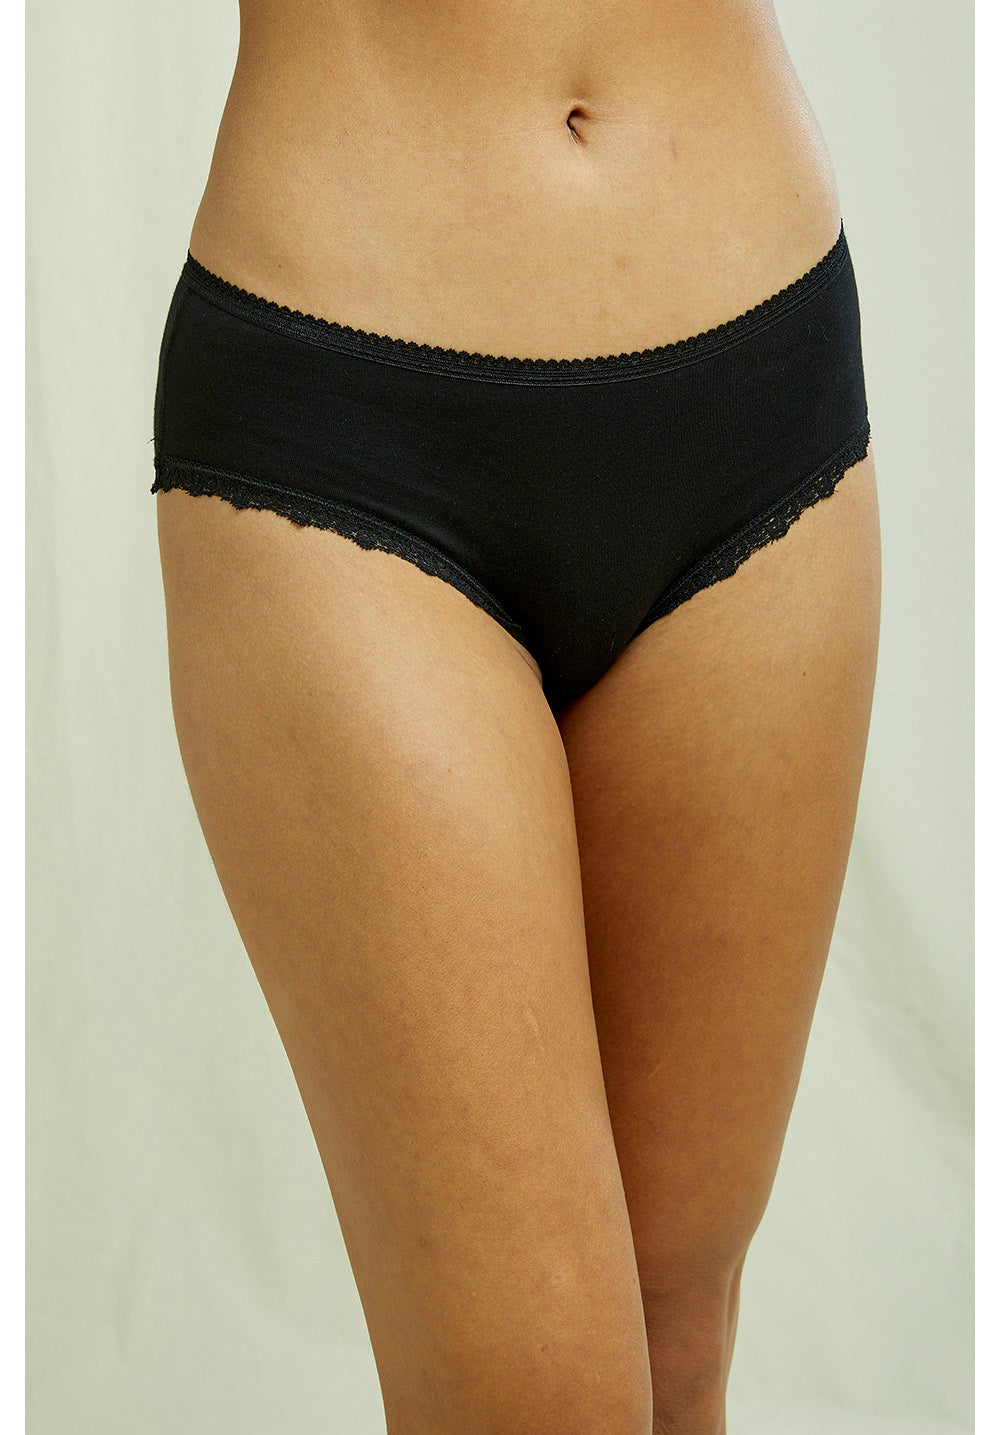 Stretch Sexy Lace Cheeky Hipster Panty Black